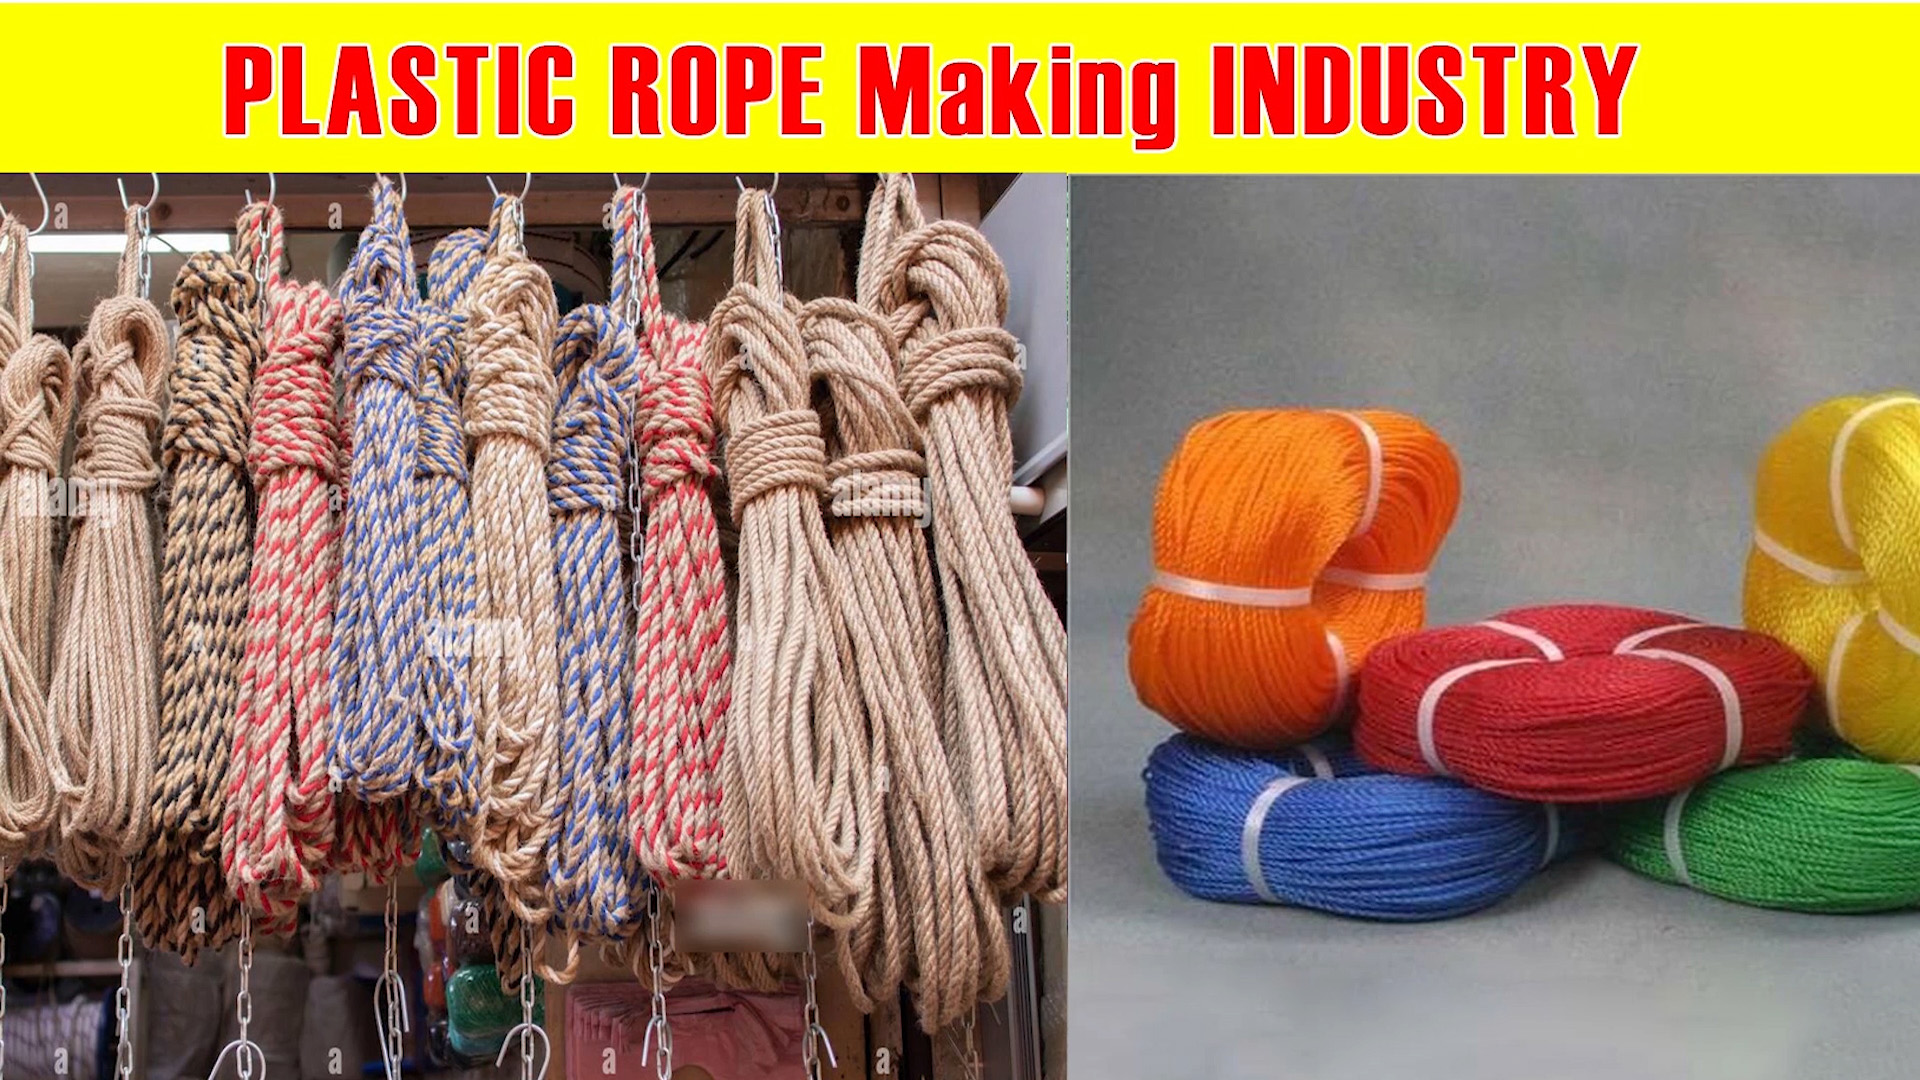 How to make Plastic rope and how to start plastic rope industry